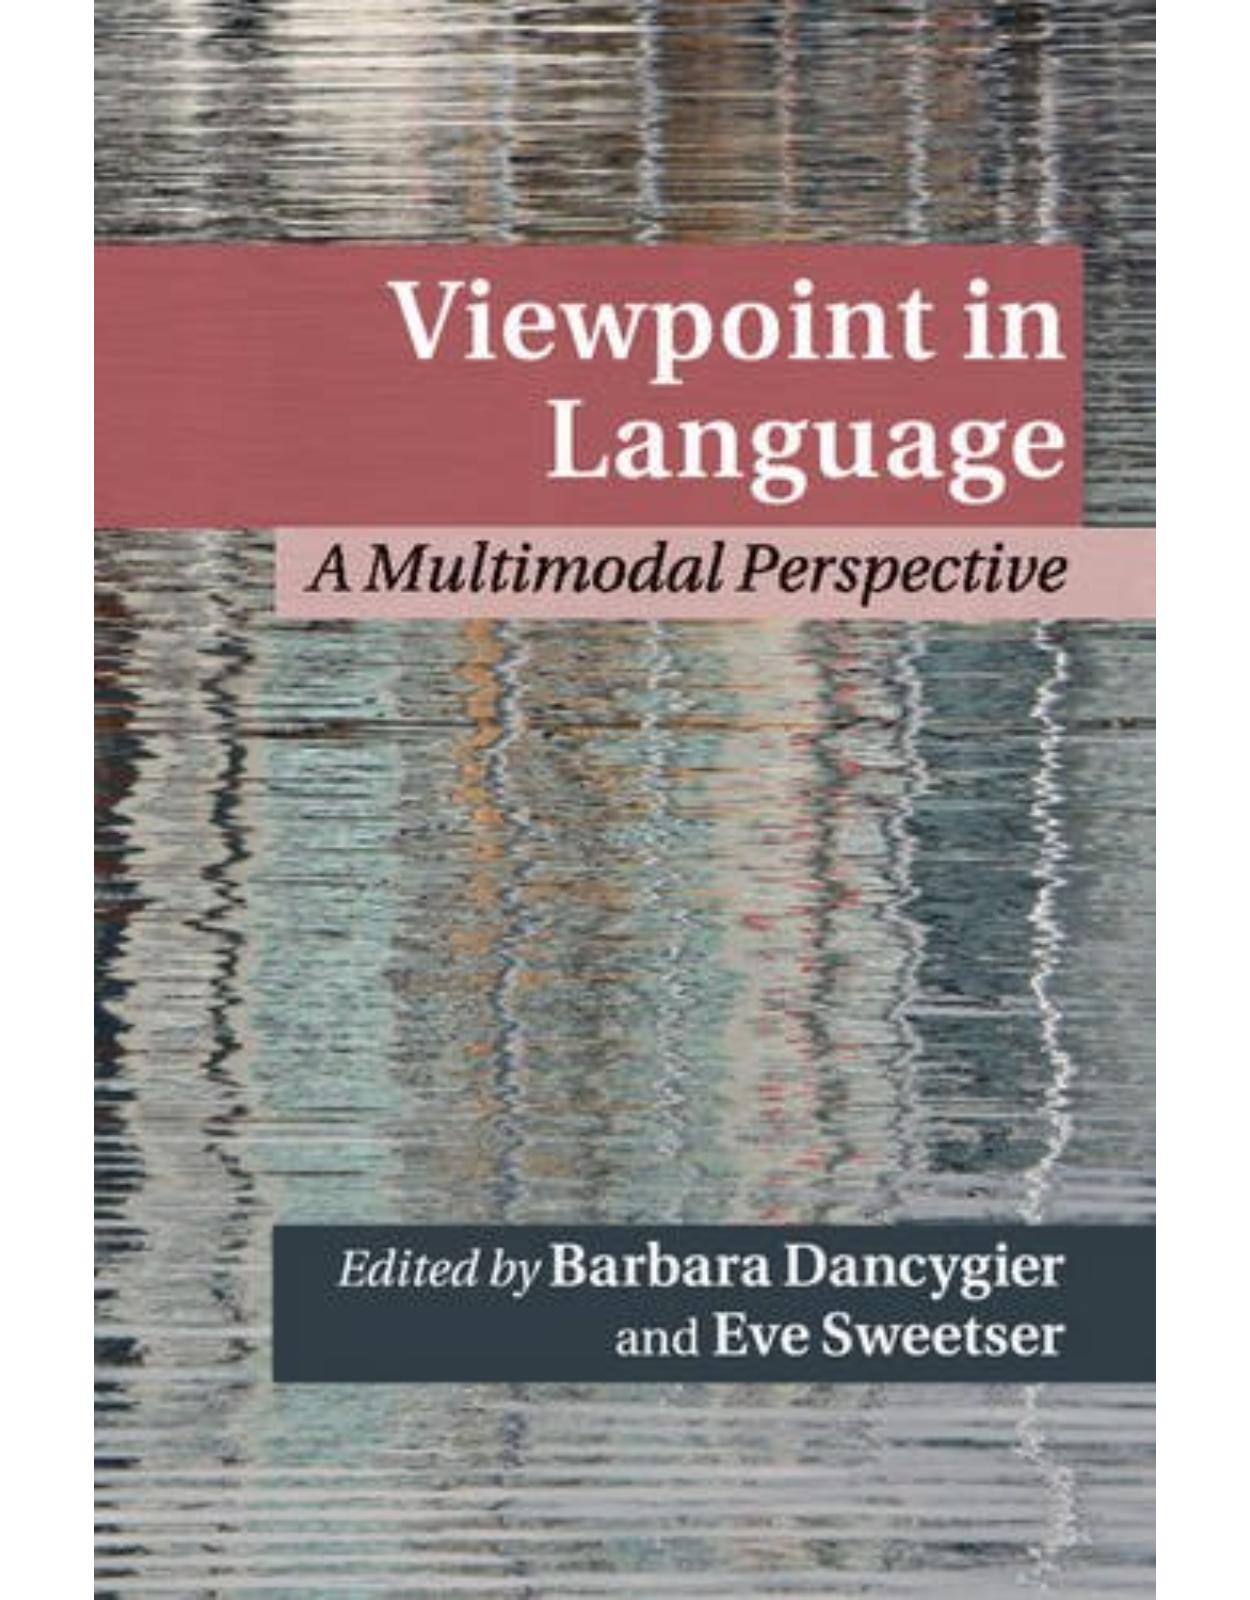 Viewpoint in Language: A Multimodal Perspective (Cambridge Studies in Cognitive Linguistics)